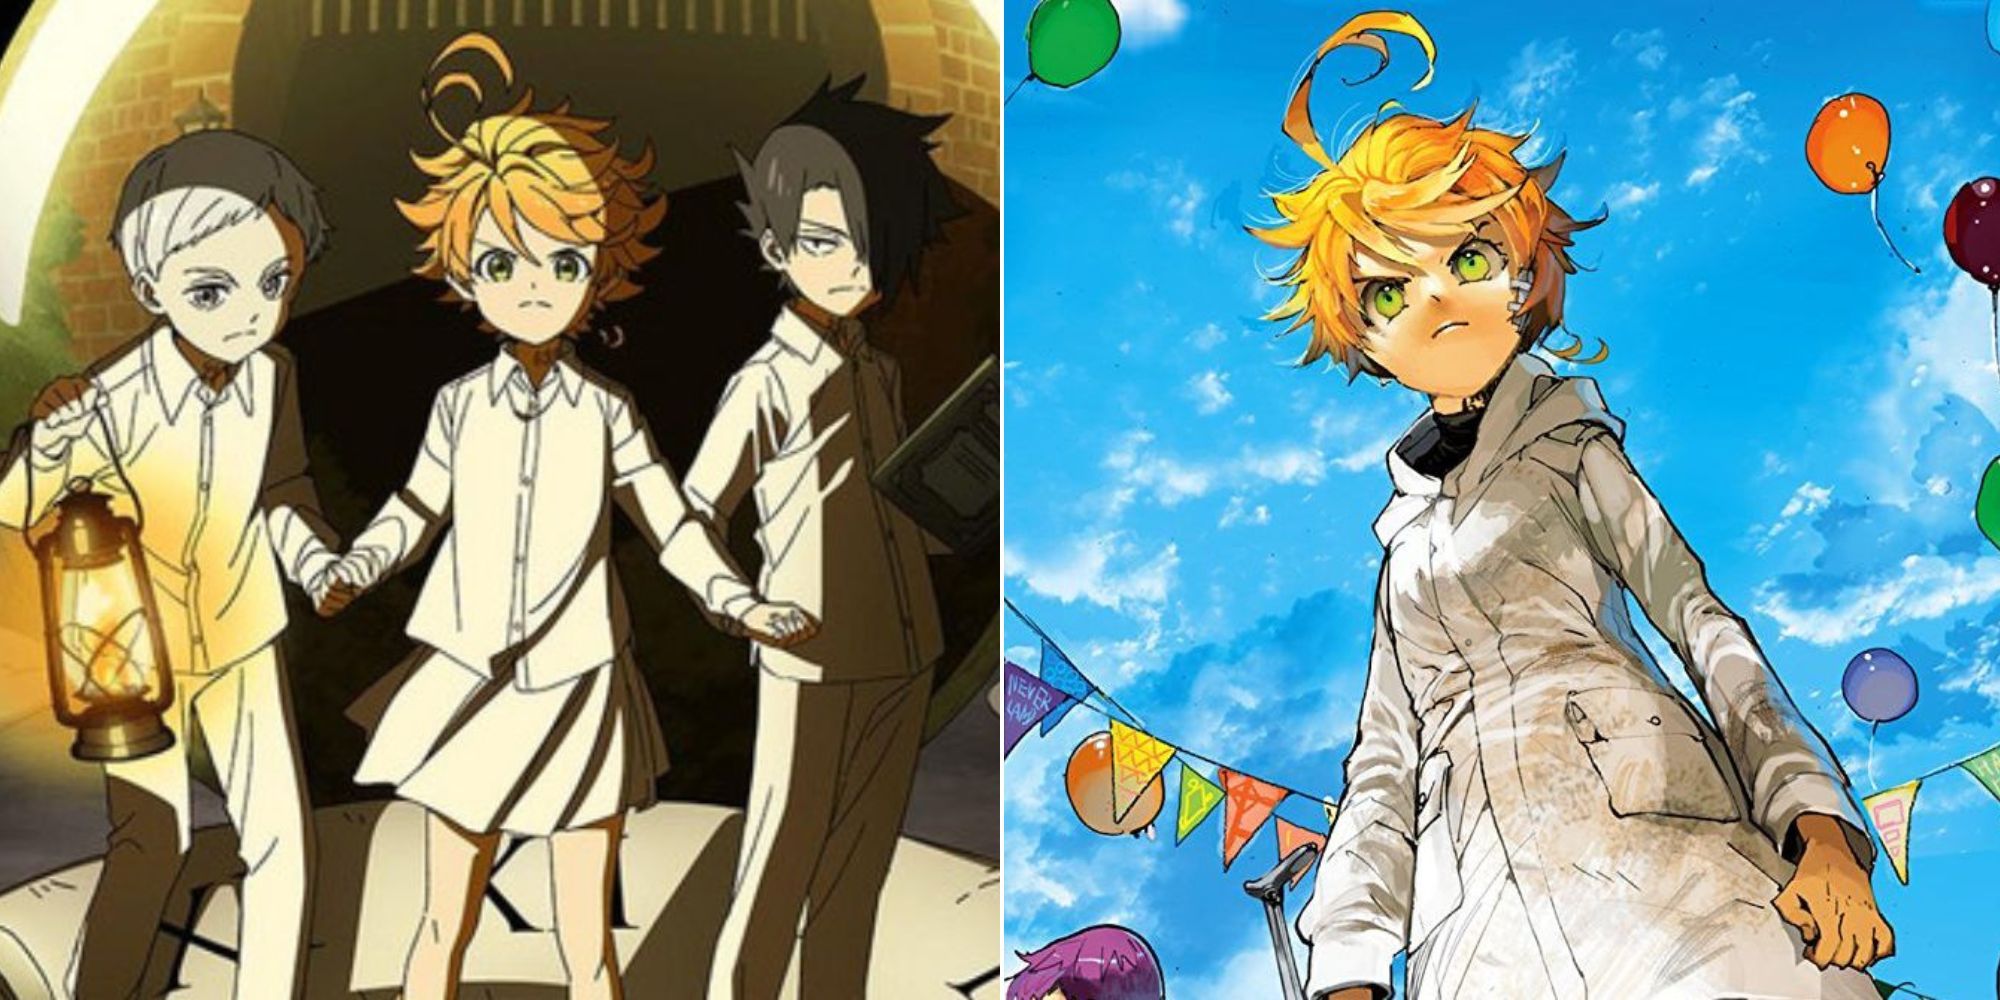 Split image of the promised neverland anime poster and manga cover art